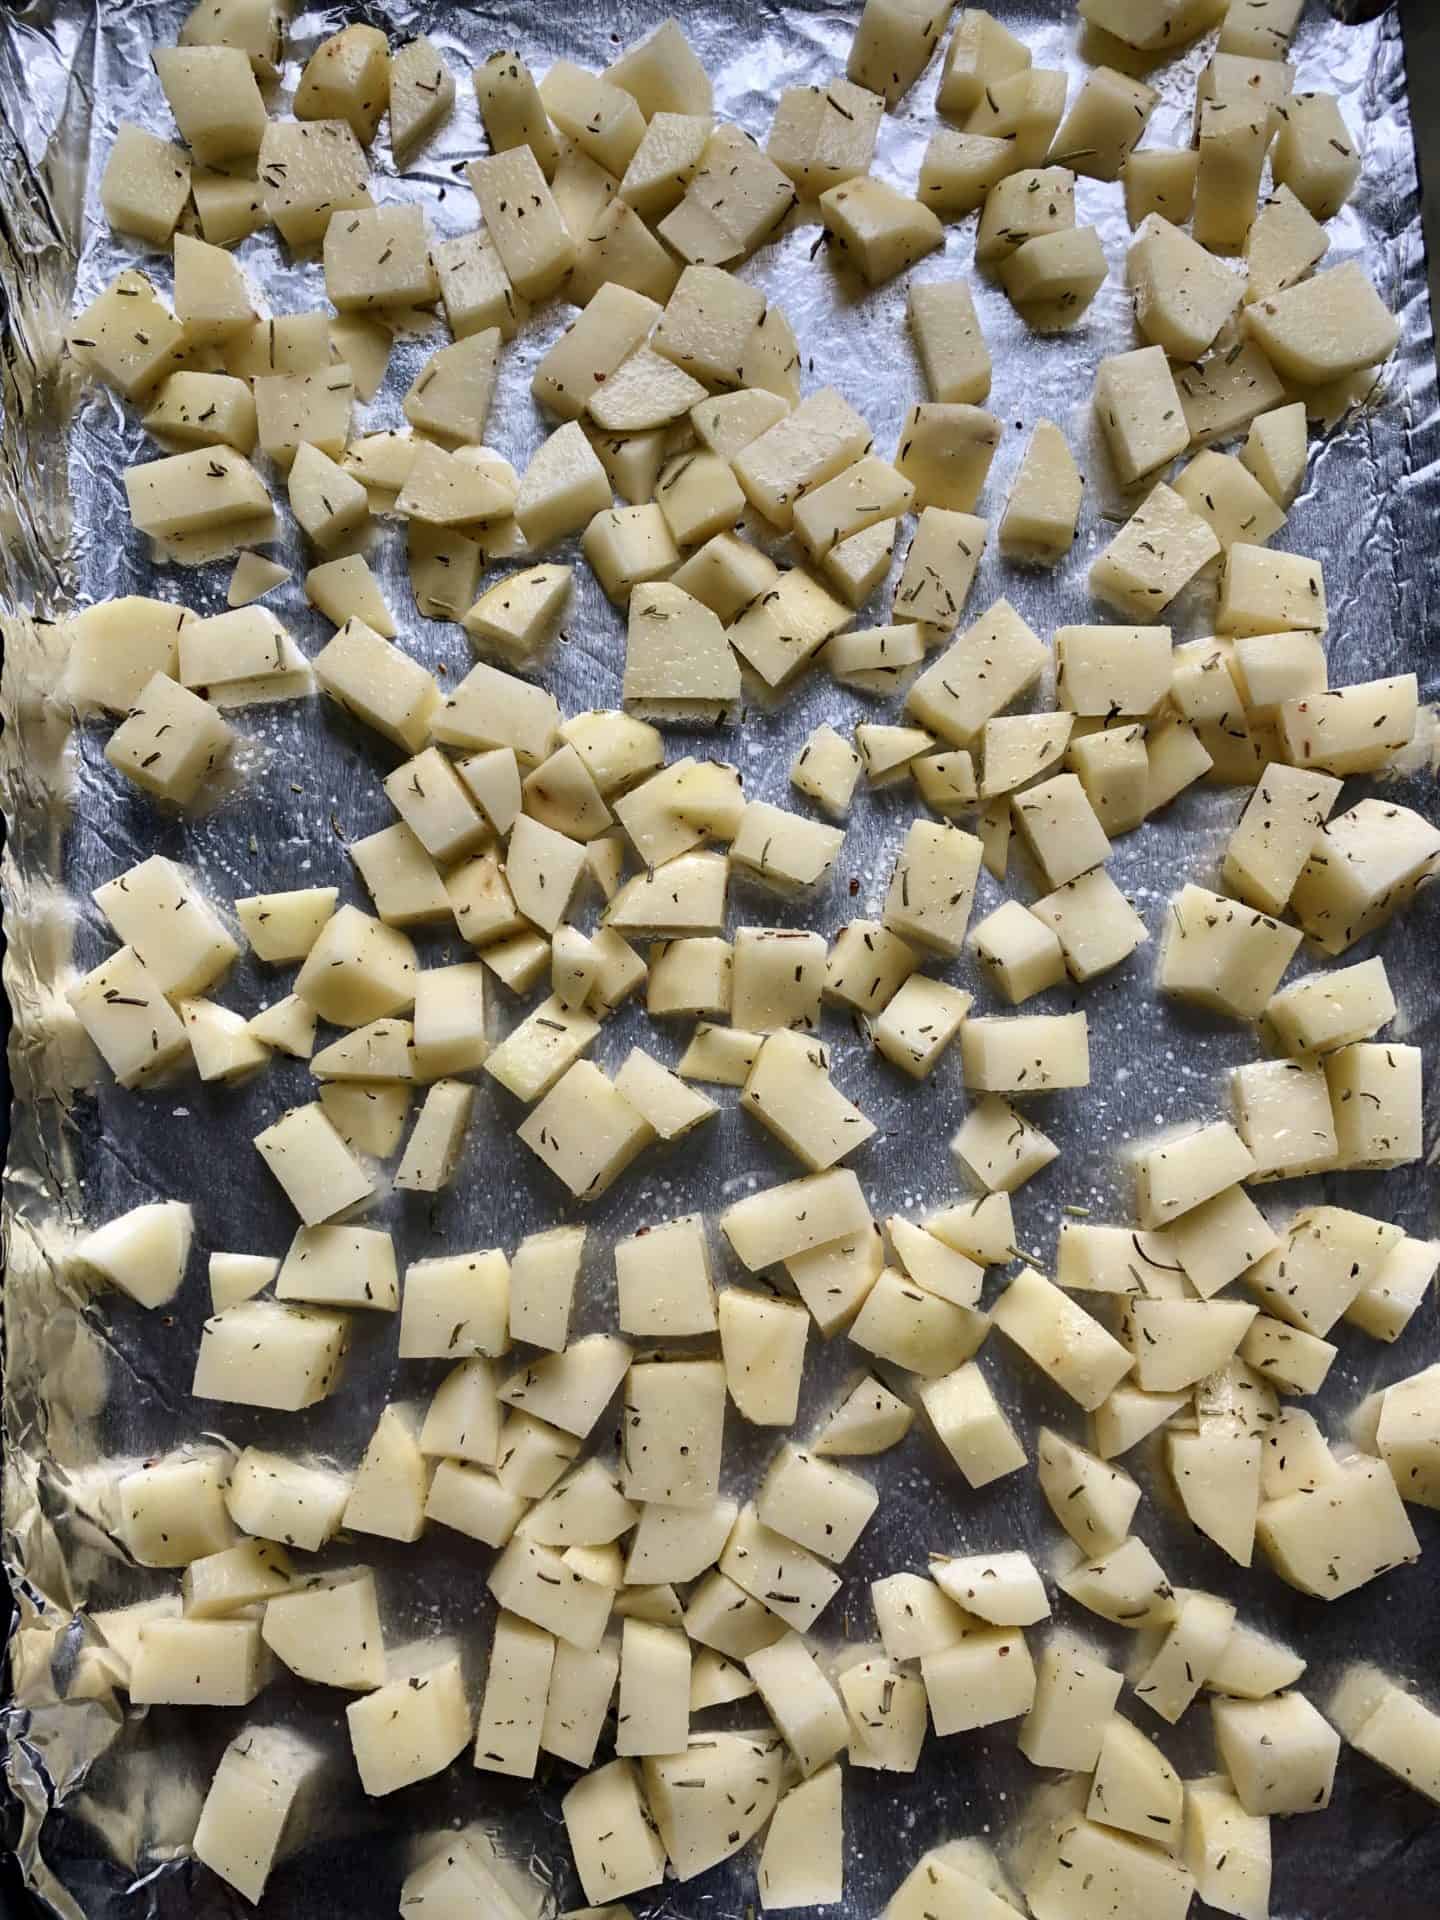 diced potatoes uncooked on baking sheet